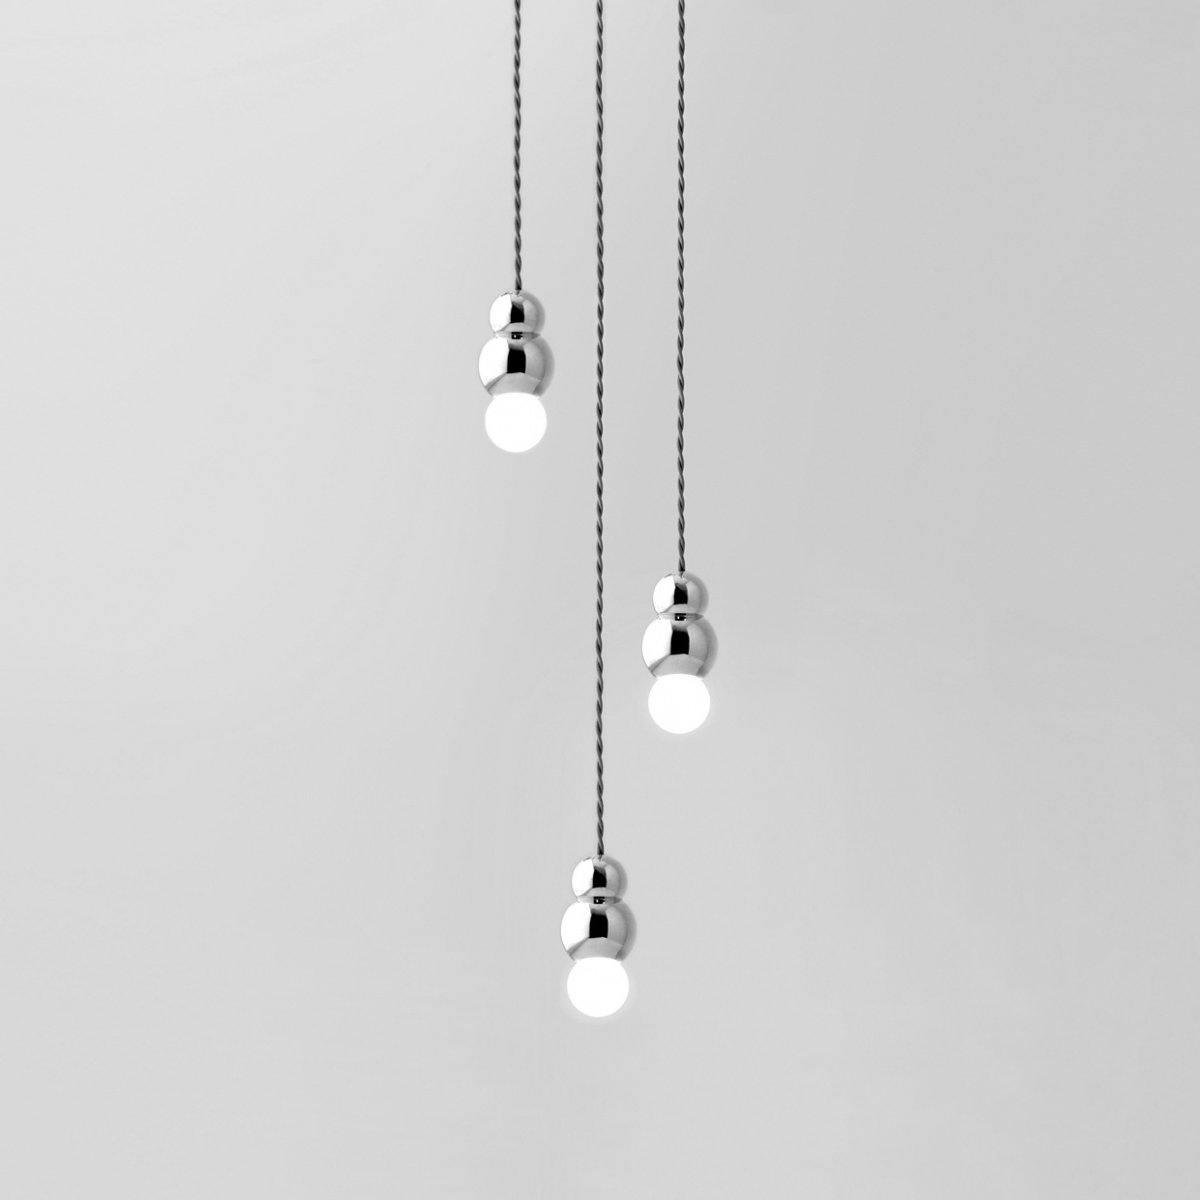 3-Head Ball Light Pendant Series with a Diameter of 3.14 inches and a Height of 5.03 inches, or 8cm x 12.8cm, in a Chrome finish with flexible features.